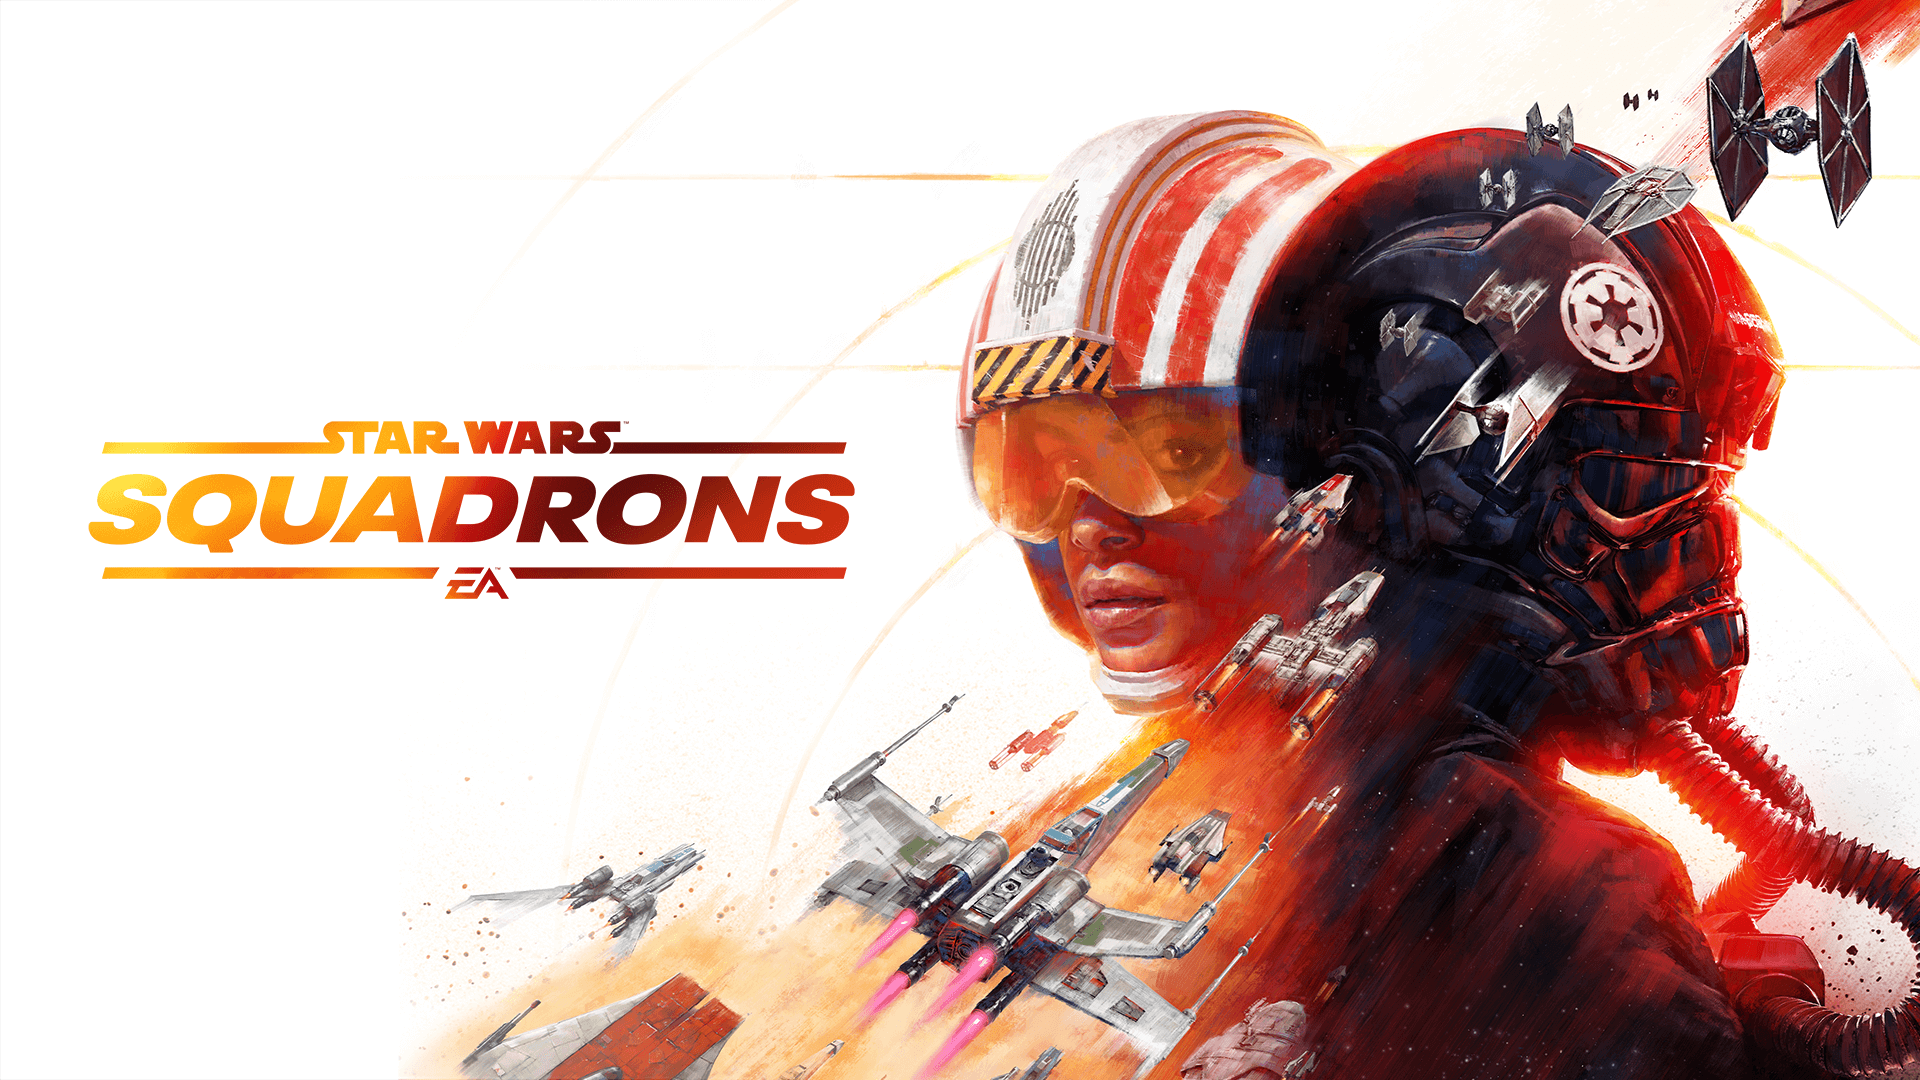 Star Wars: Squadrons Is A Cross-Play Dogfighting Game With Zero Microtransactions